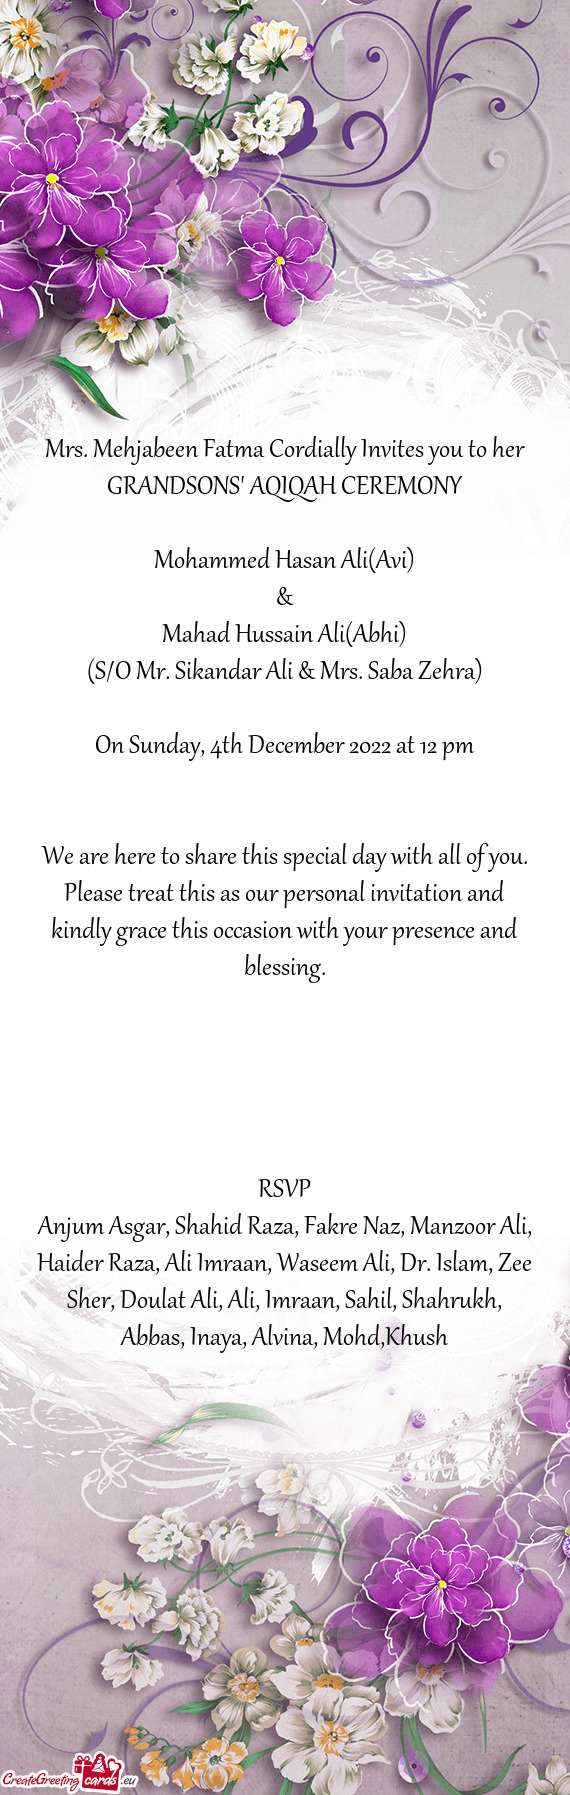 Mrs. Mehjabeen Fatma Cordially Invites you to her GRANDSONS